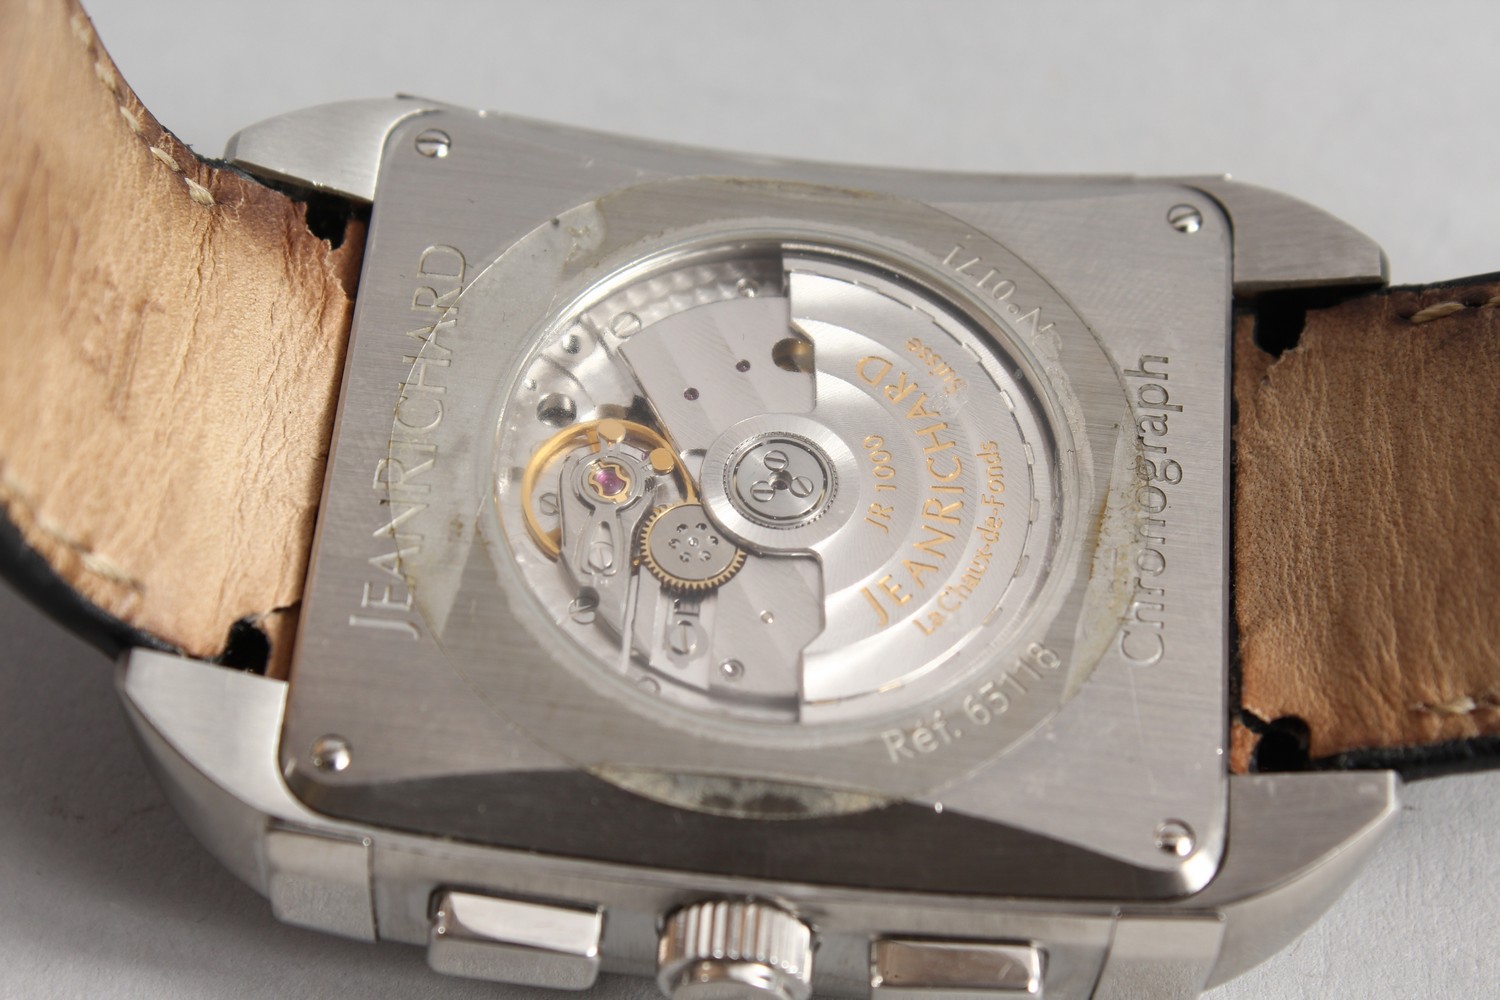 JEAN RICHARD CHRONOGRAPH, Ref. 65110, with leather strap, in original box. - Image 7 of 8